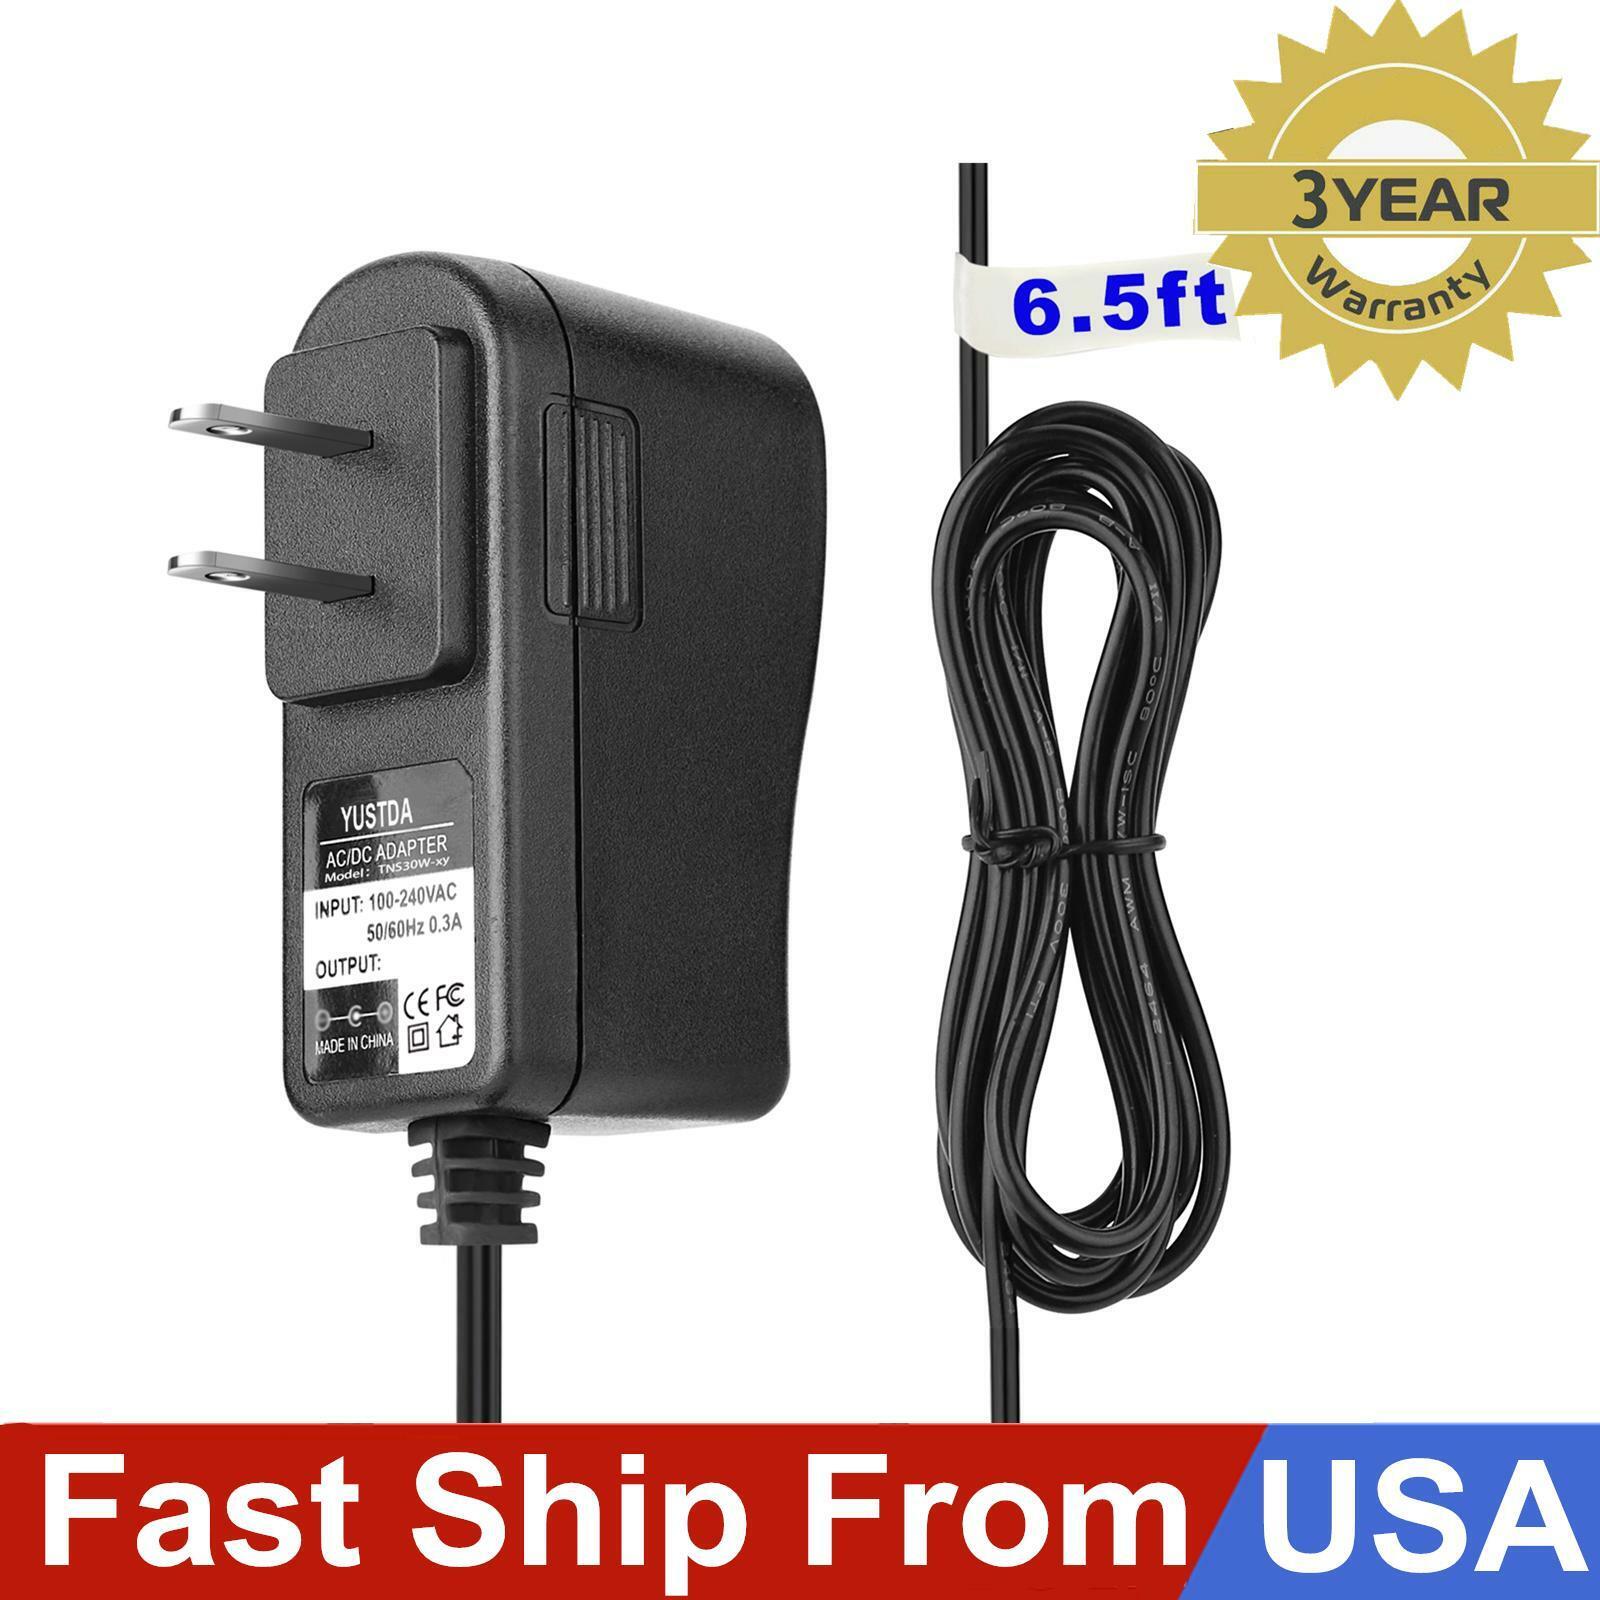 7.5VDC AC Adapter For Kids Vtech InnoTab 3/3S InnoTab3 Charger Power Supply Cord